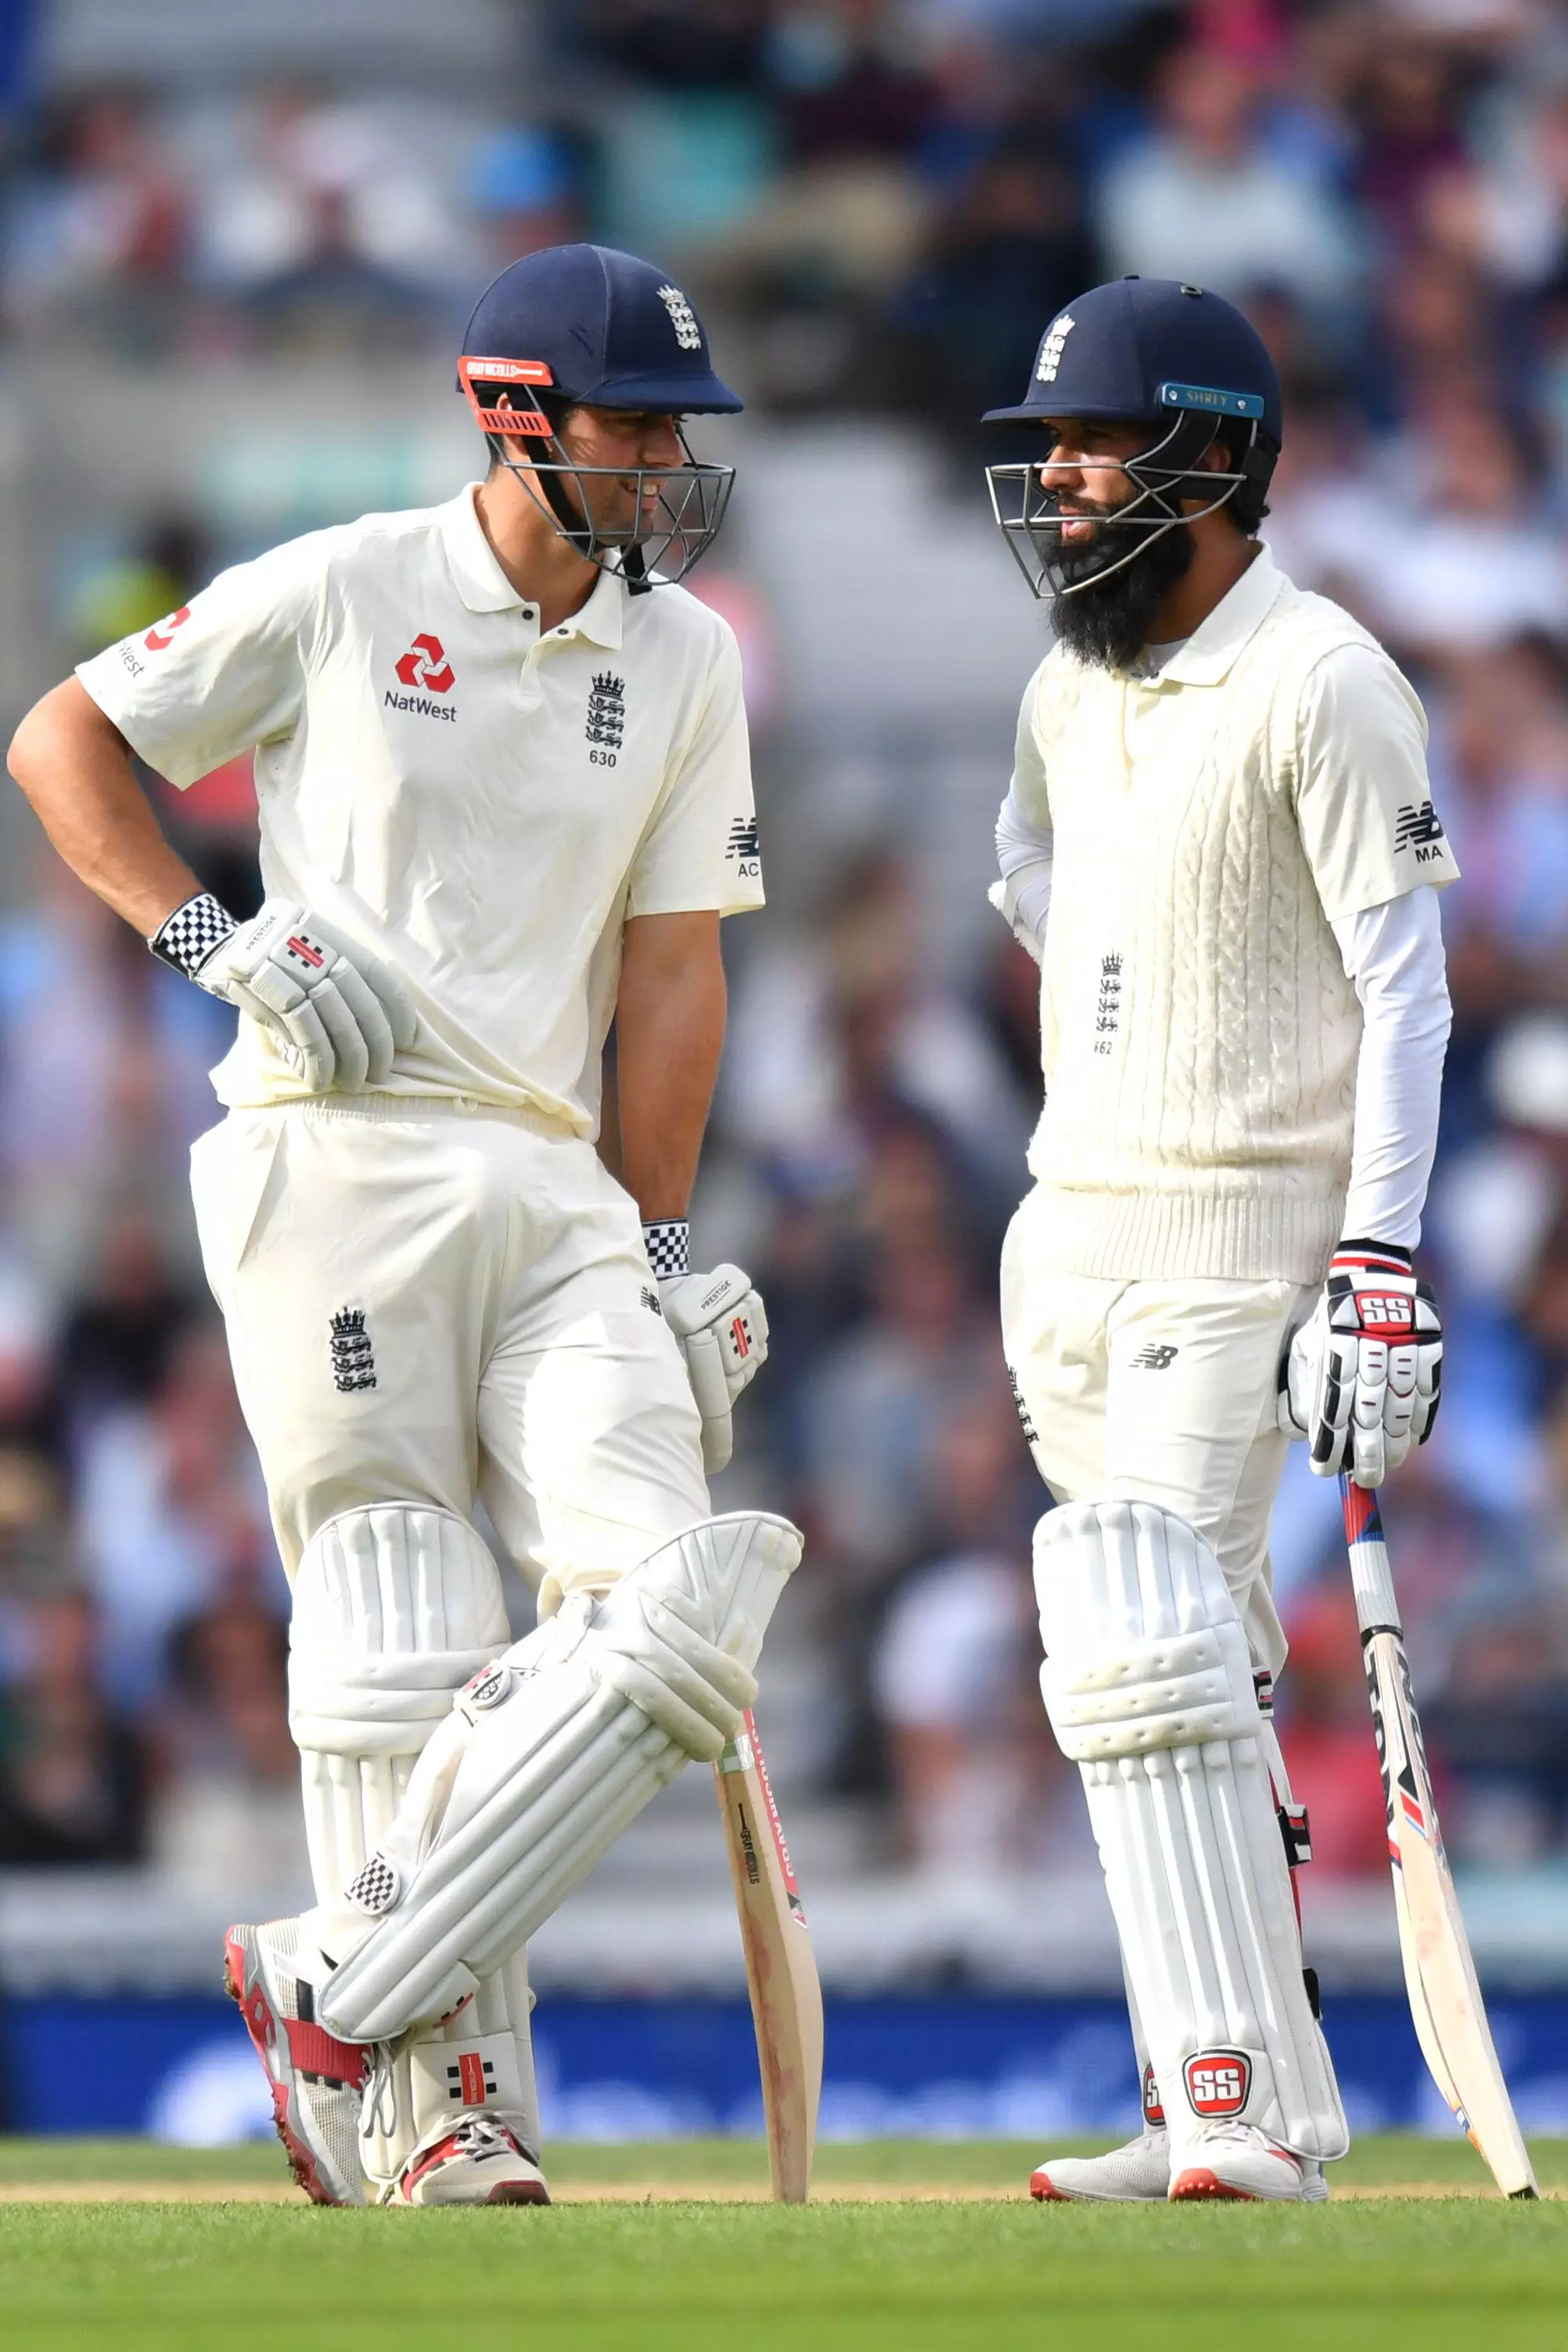 Alastair Cook and Moeen Ali.